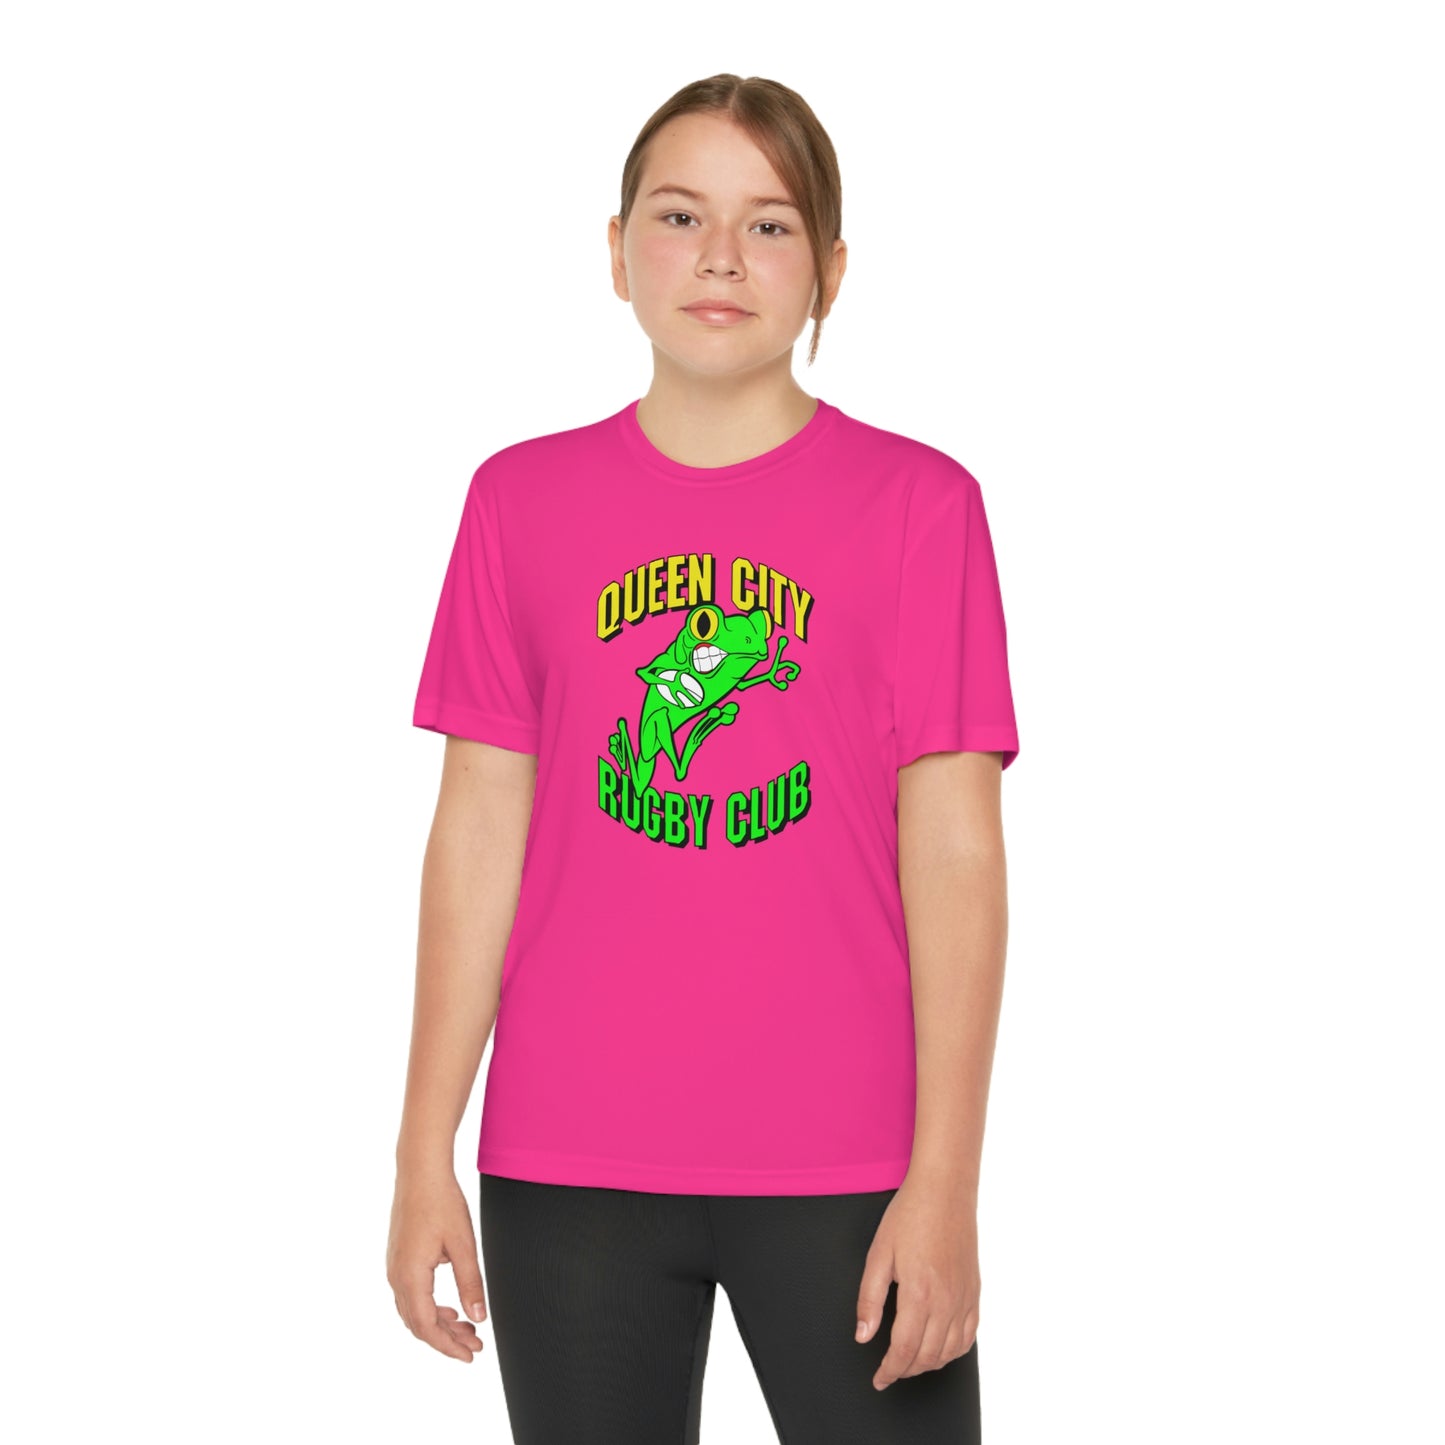 Youth Competitor Tee | QCRFC Frogs Logo